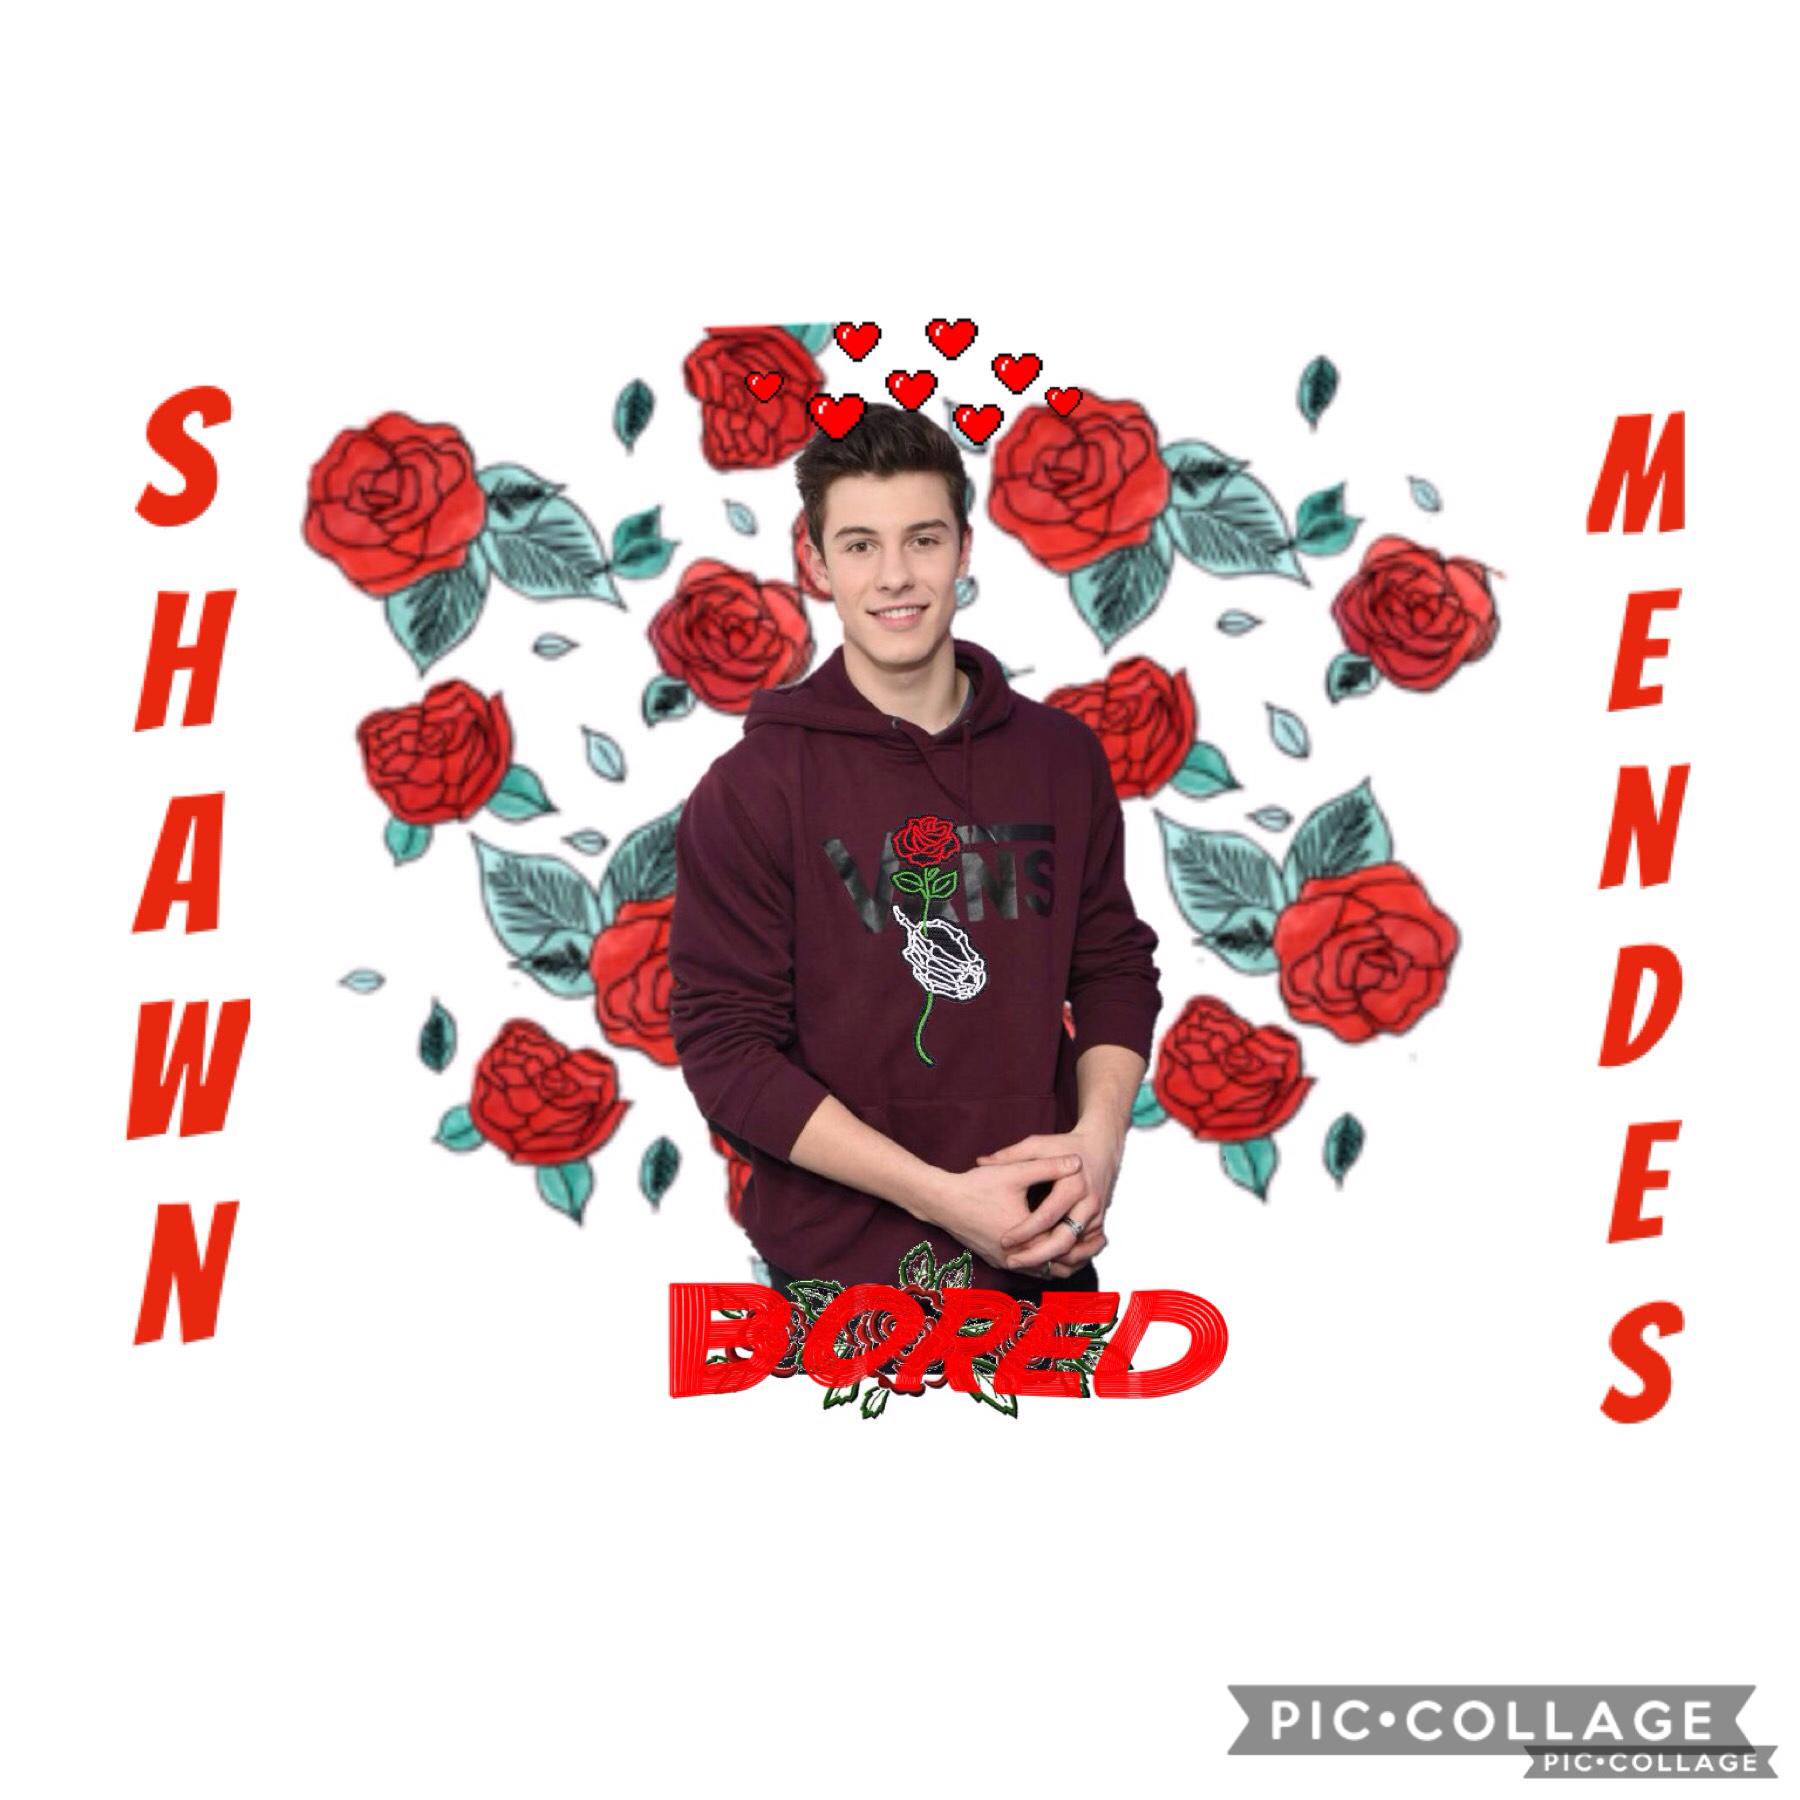 ~ShAwN mEnDeS~